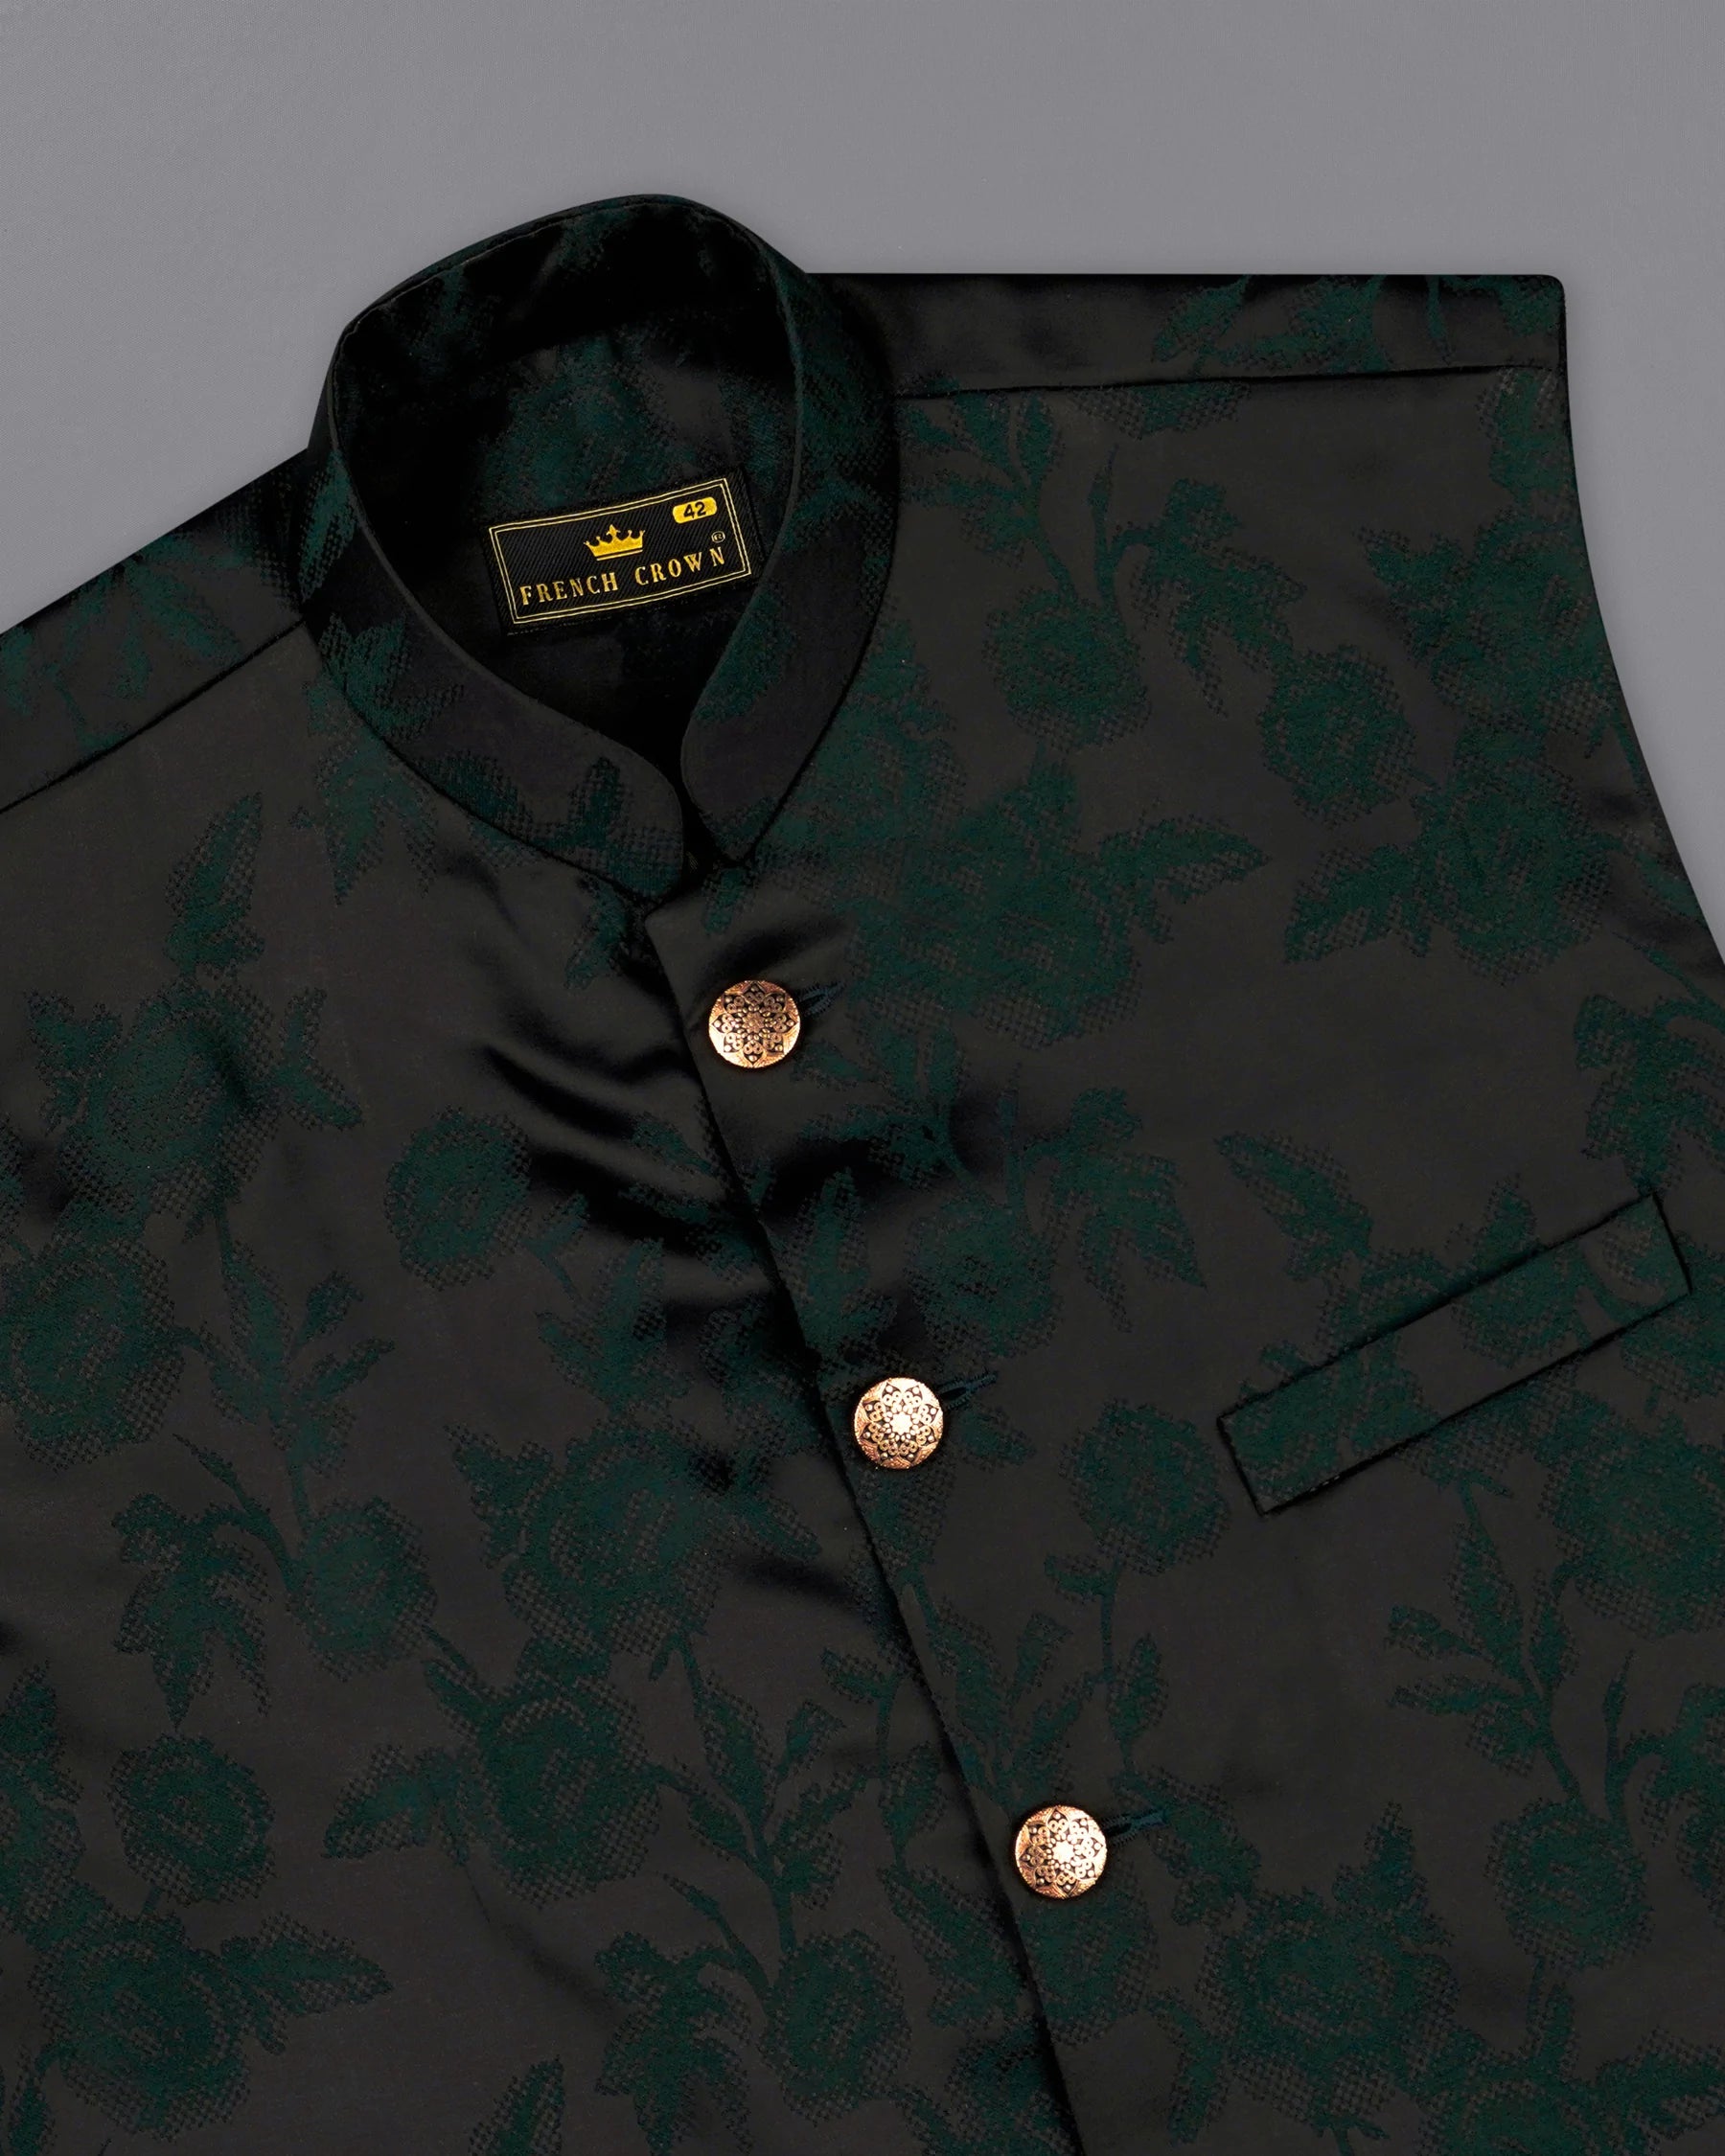 Zeus Black and Holly Dark Green Floral Printed Nehru Jacket WC2168-38, WC2168-39, WC2168-40, WC2168-42, WC2168-44, WC2168-46, WC2168-48, WC2168-50, WC2168-52